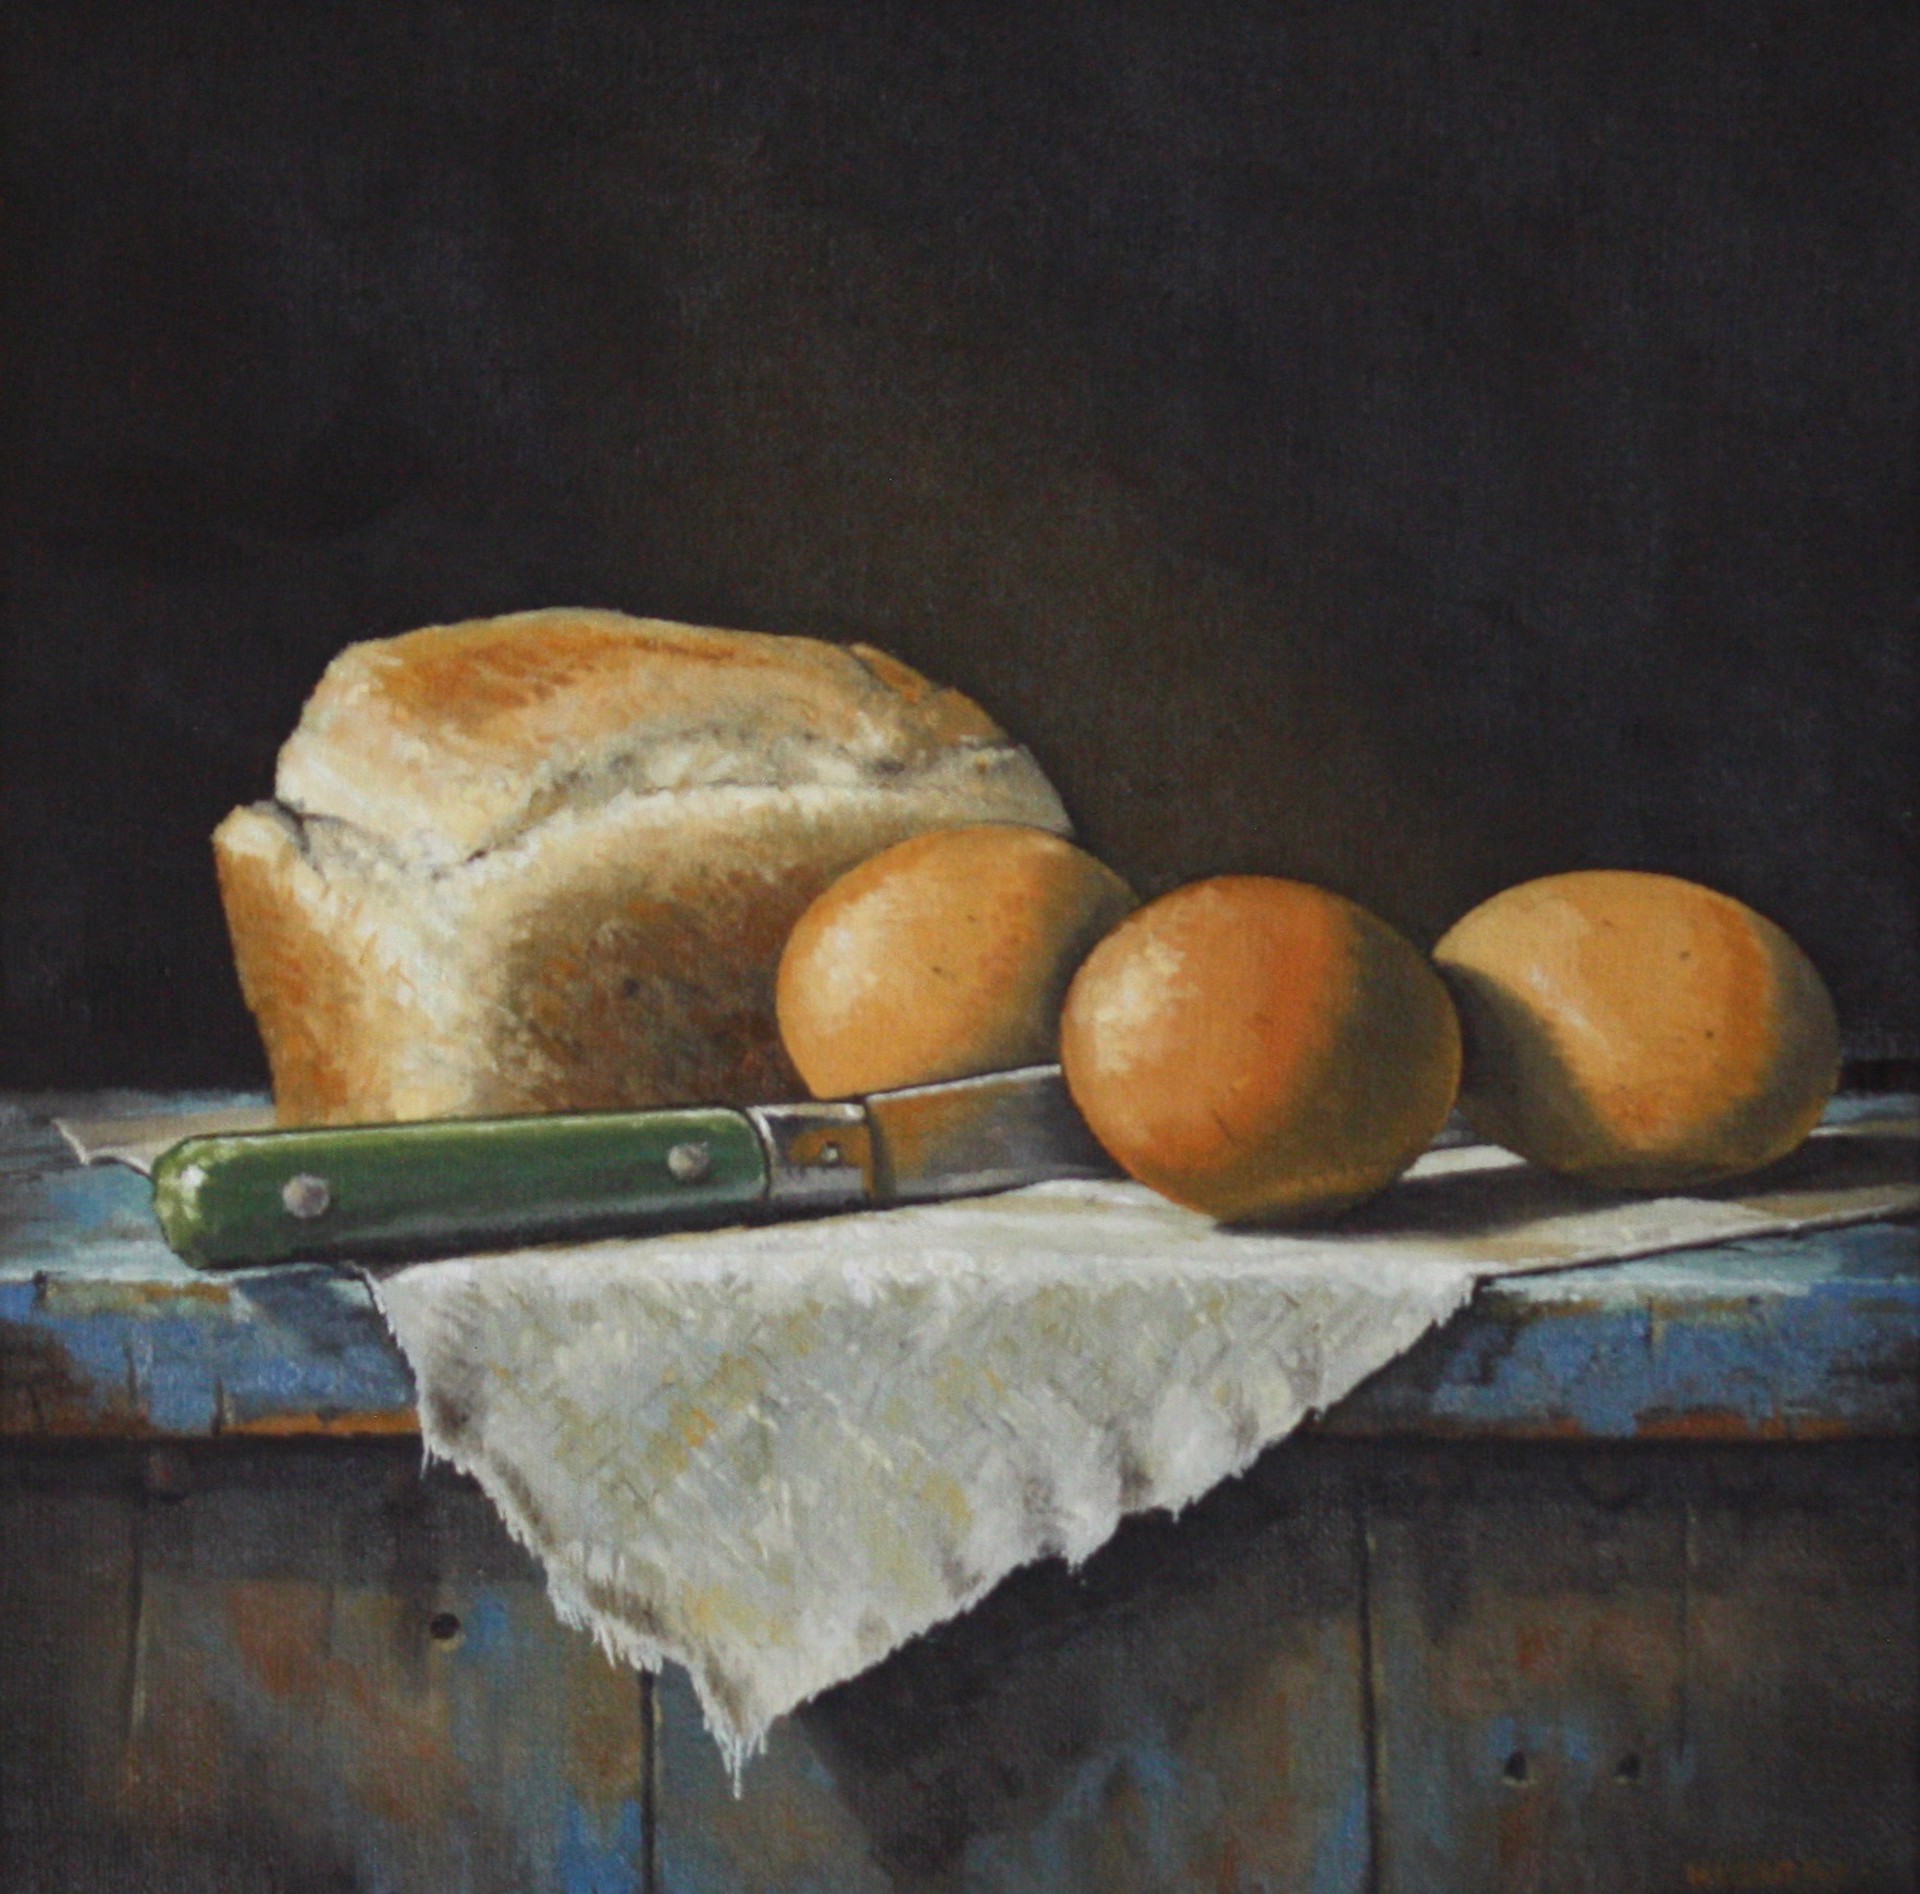 Bread & Eggs by Hickory Mertsching